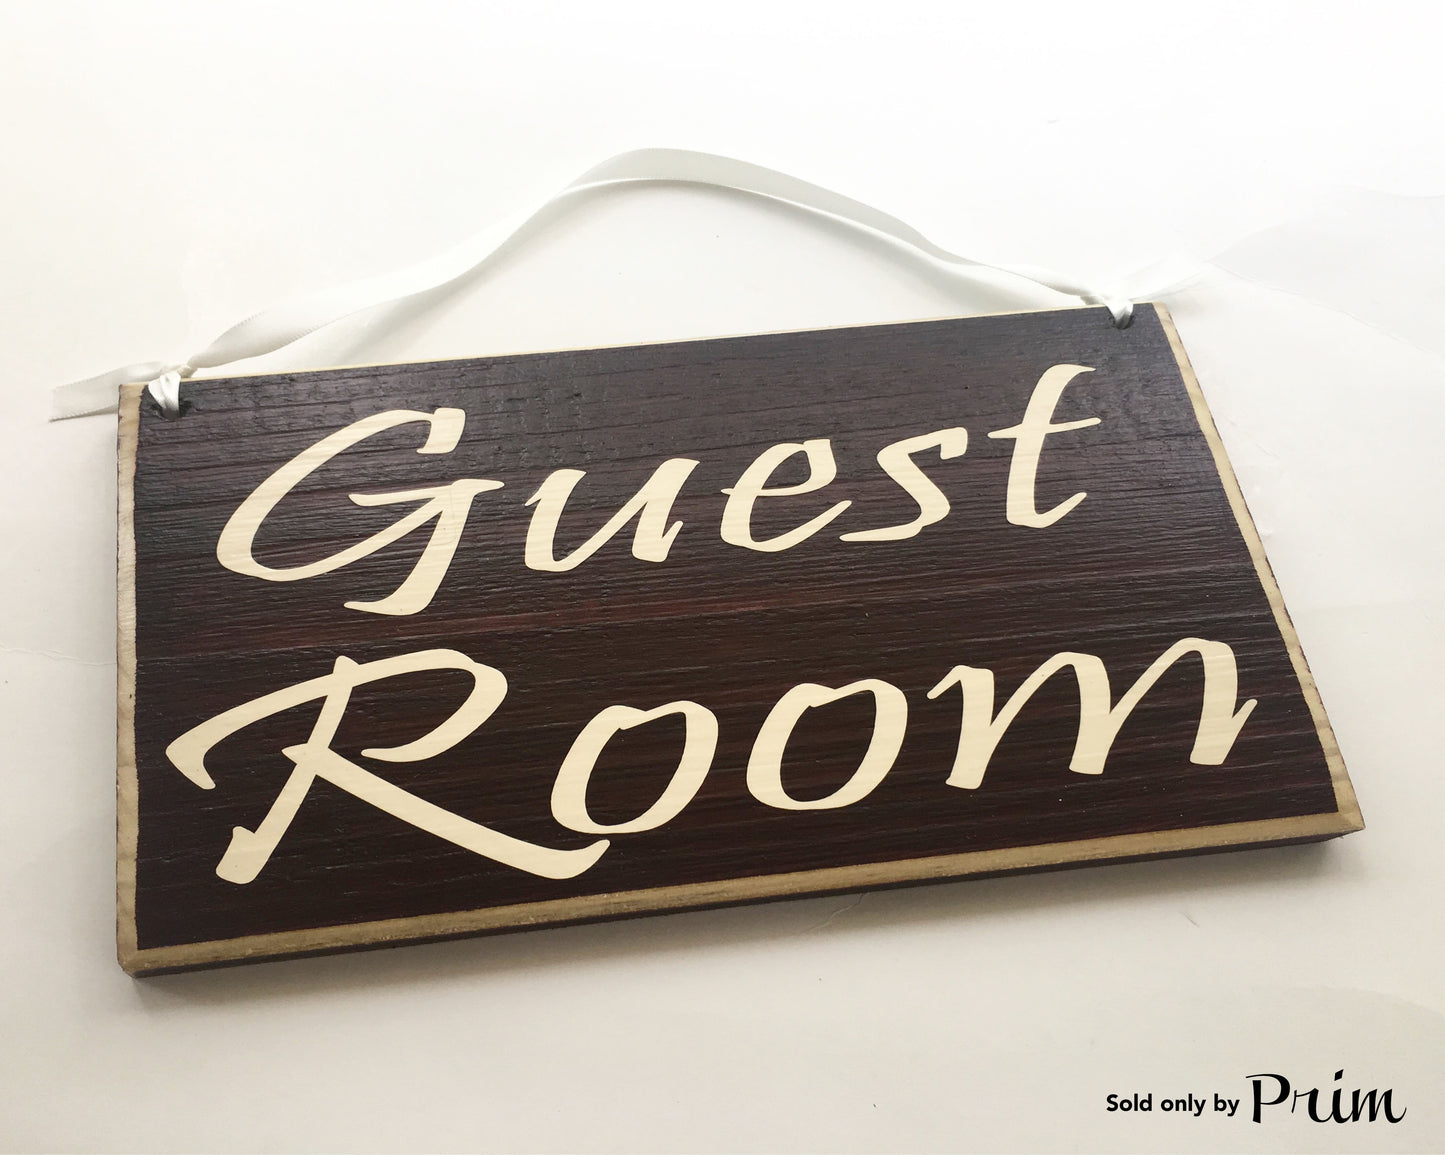 8x6 Guest Room Wood Airbnb Bed and Breakfast Sign